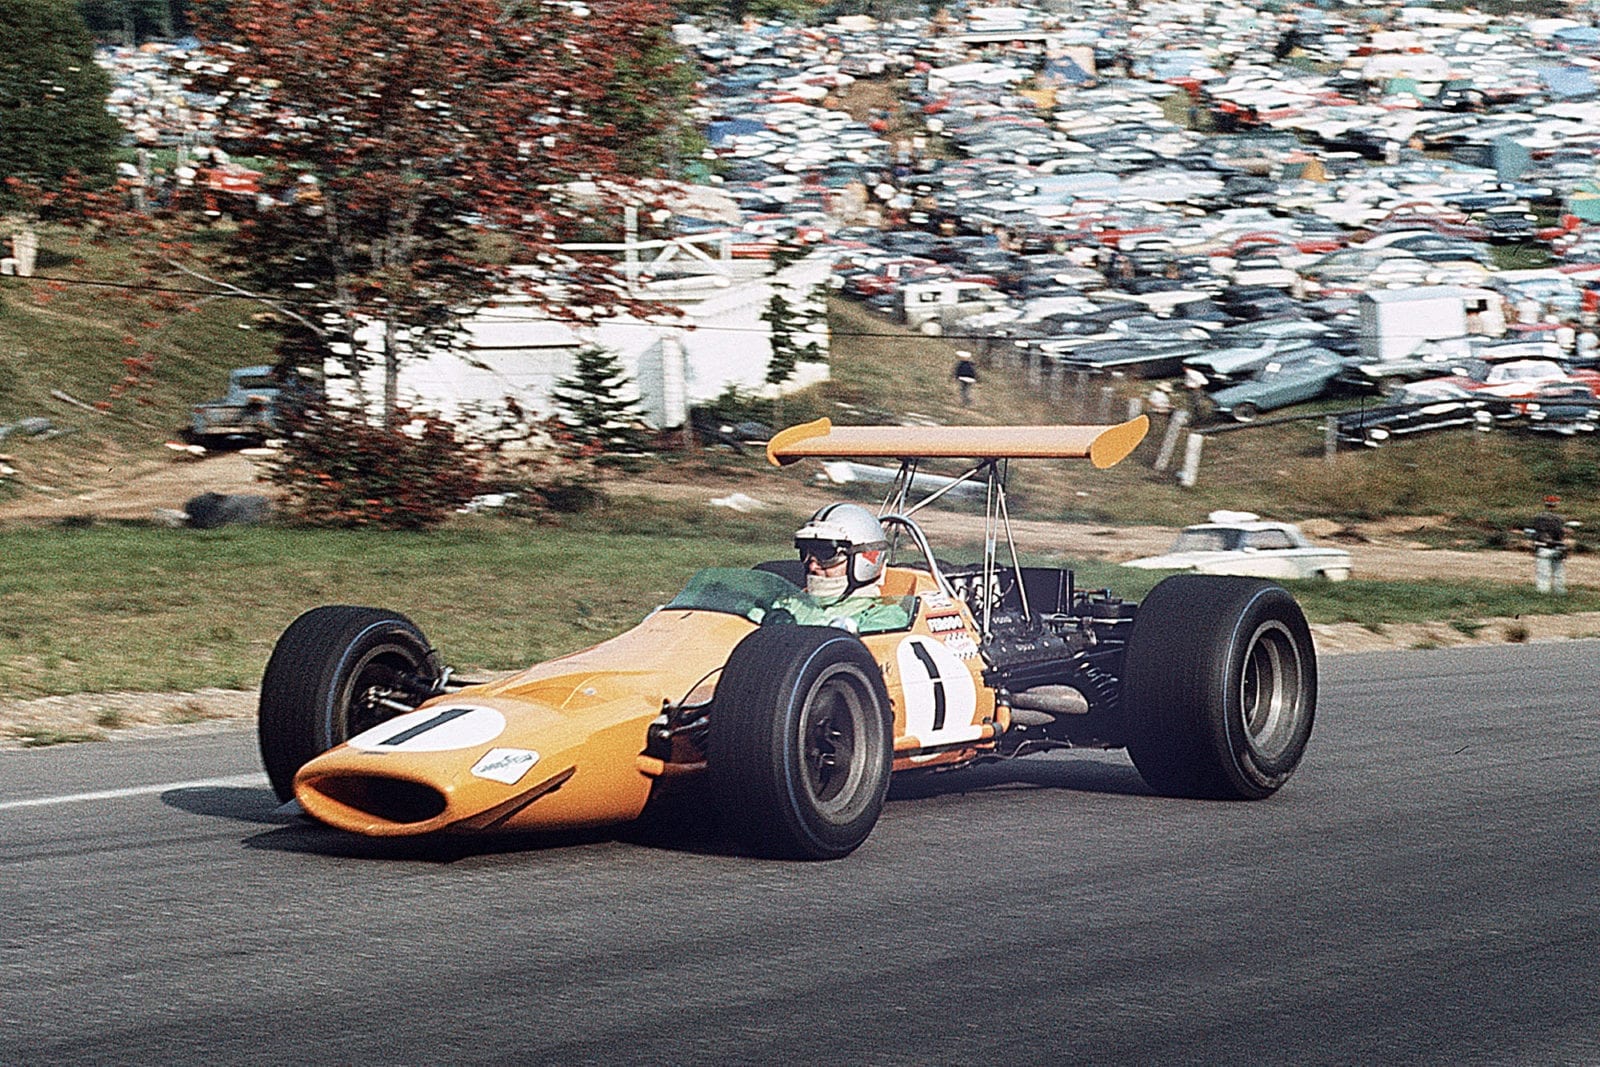 Denny Hulme in his McLaren-Ford at the 1968 Canadian Grand Prix